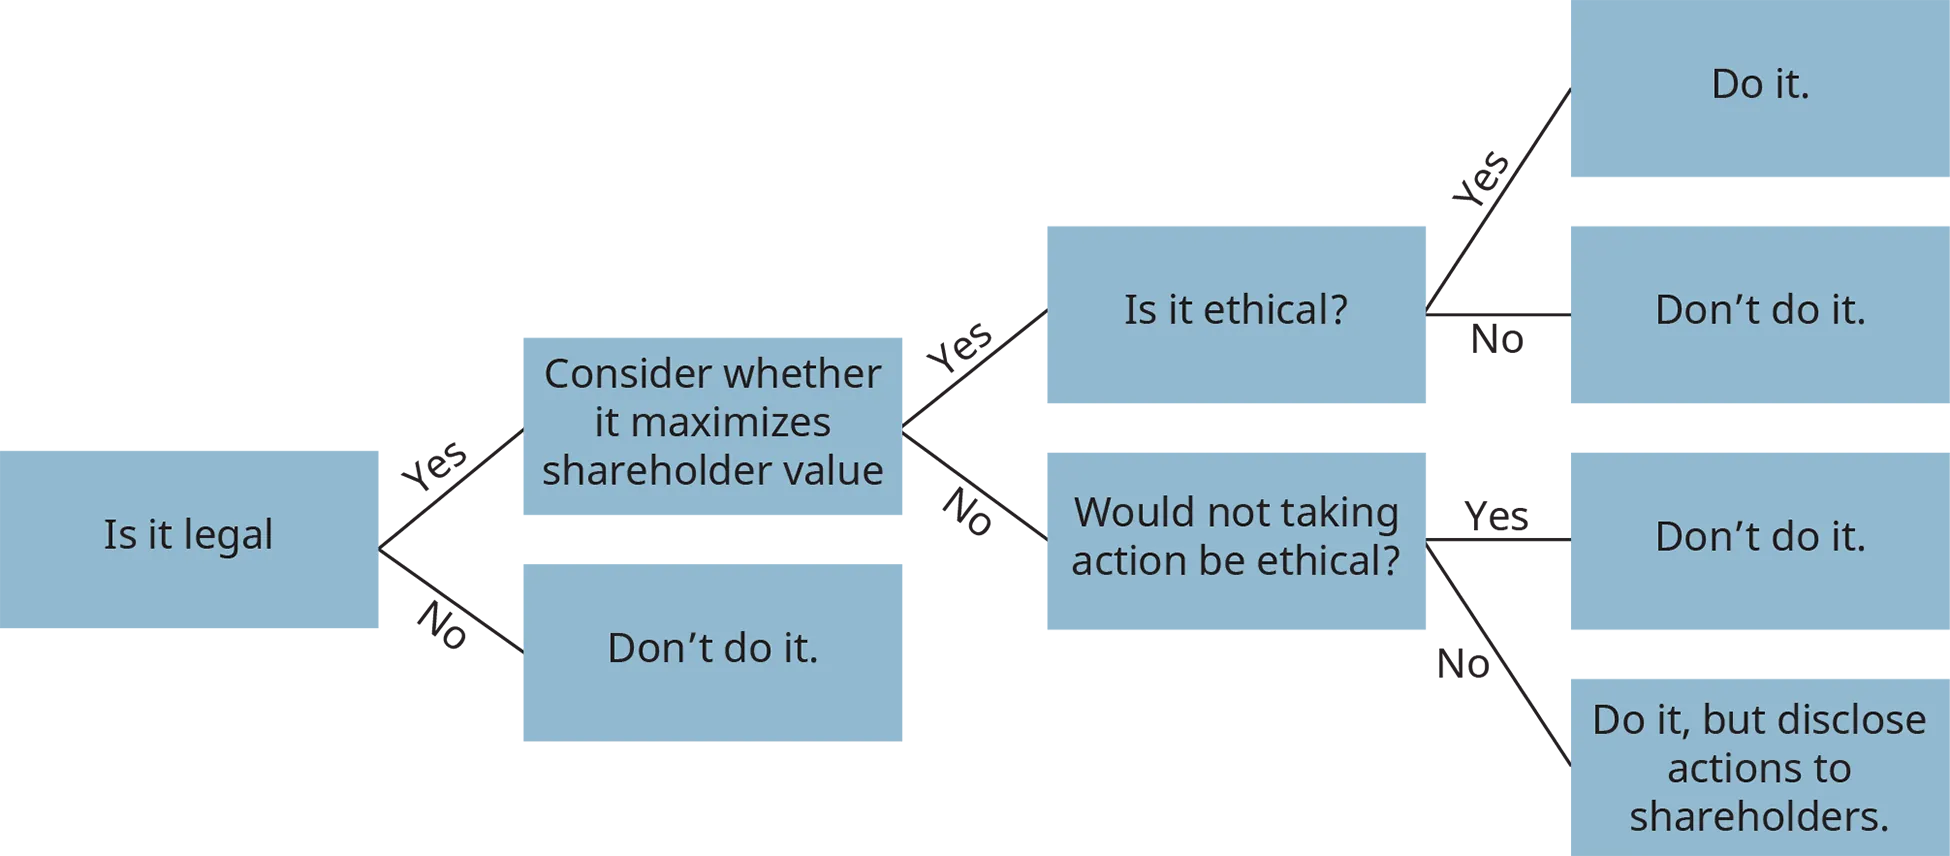 A diagram of a decision tree illustrates the process of ethical decision-making.